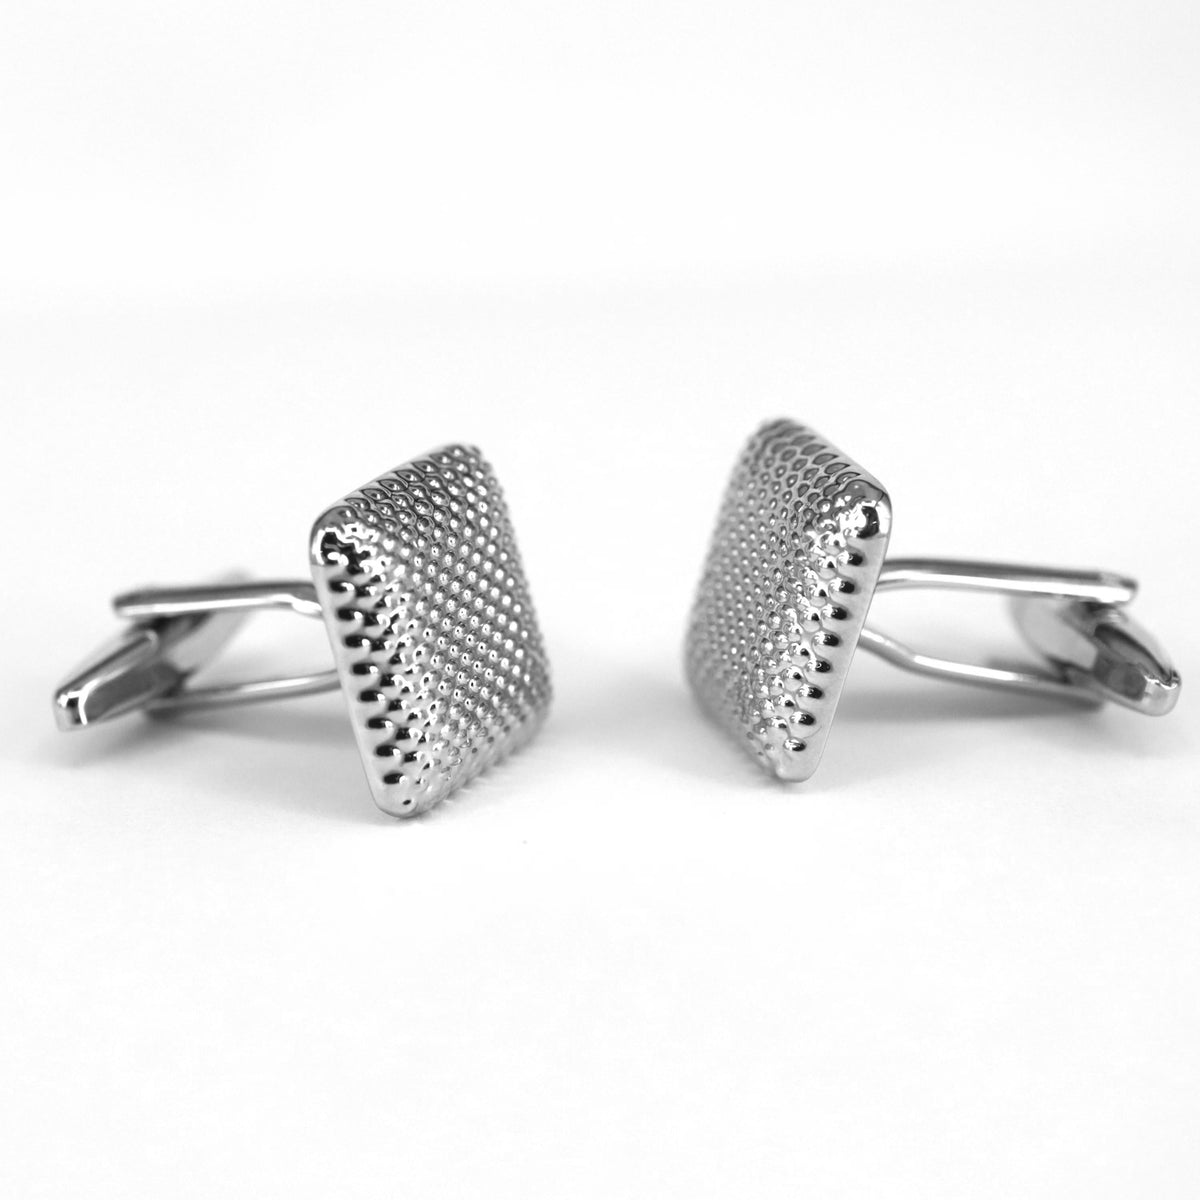 Silver Square Cufflinks with Indented Dots